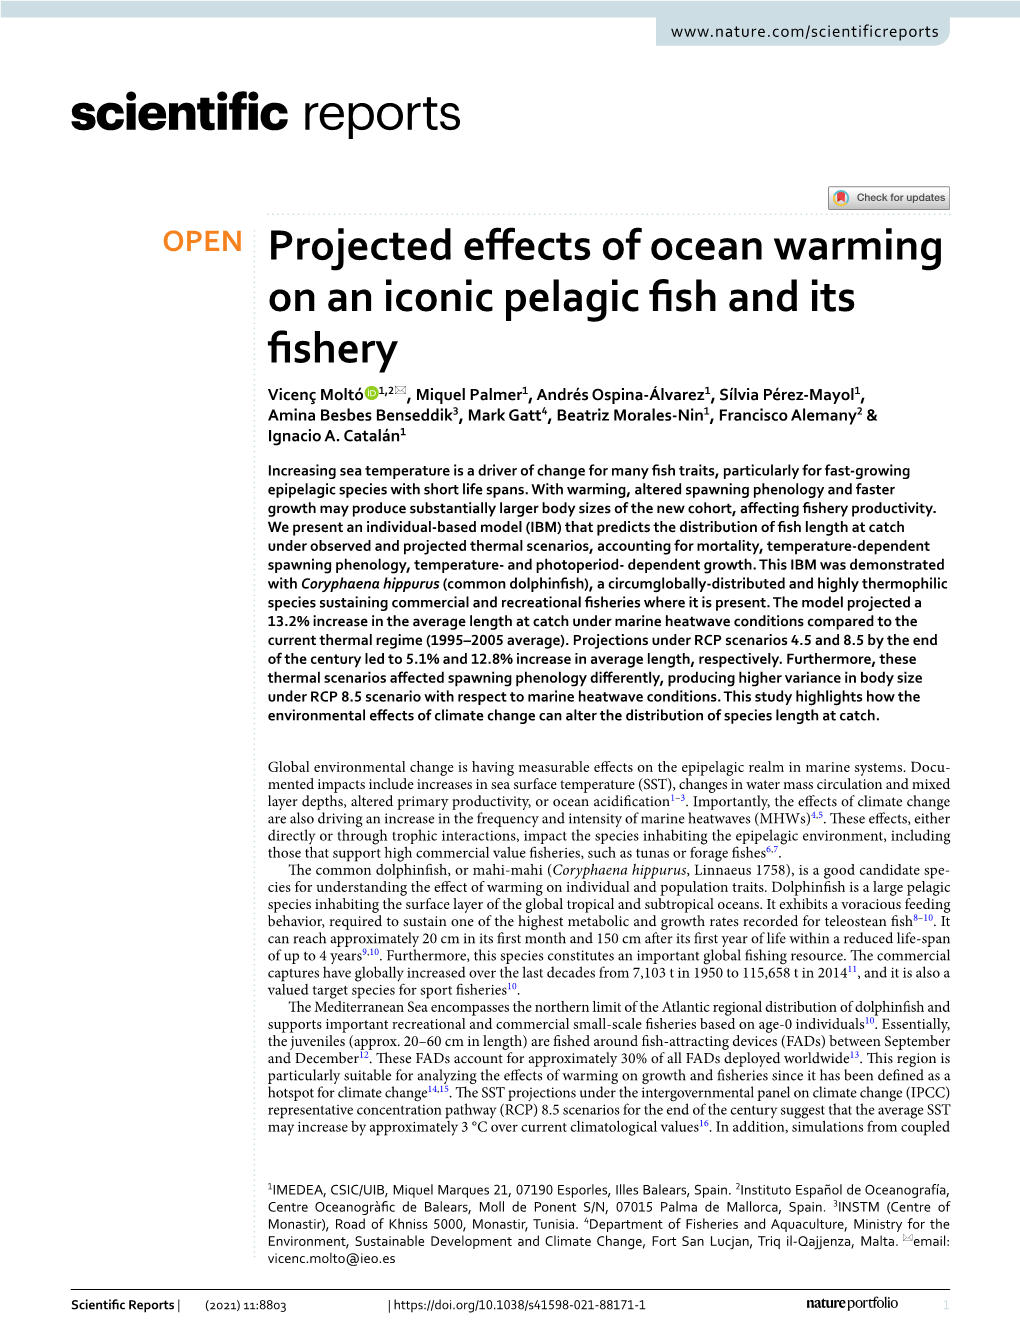 Projected Effects of Ocean Warming on an Iconic Pelagic Fish and Its Fishery